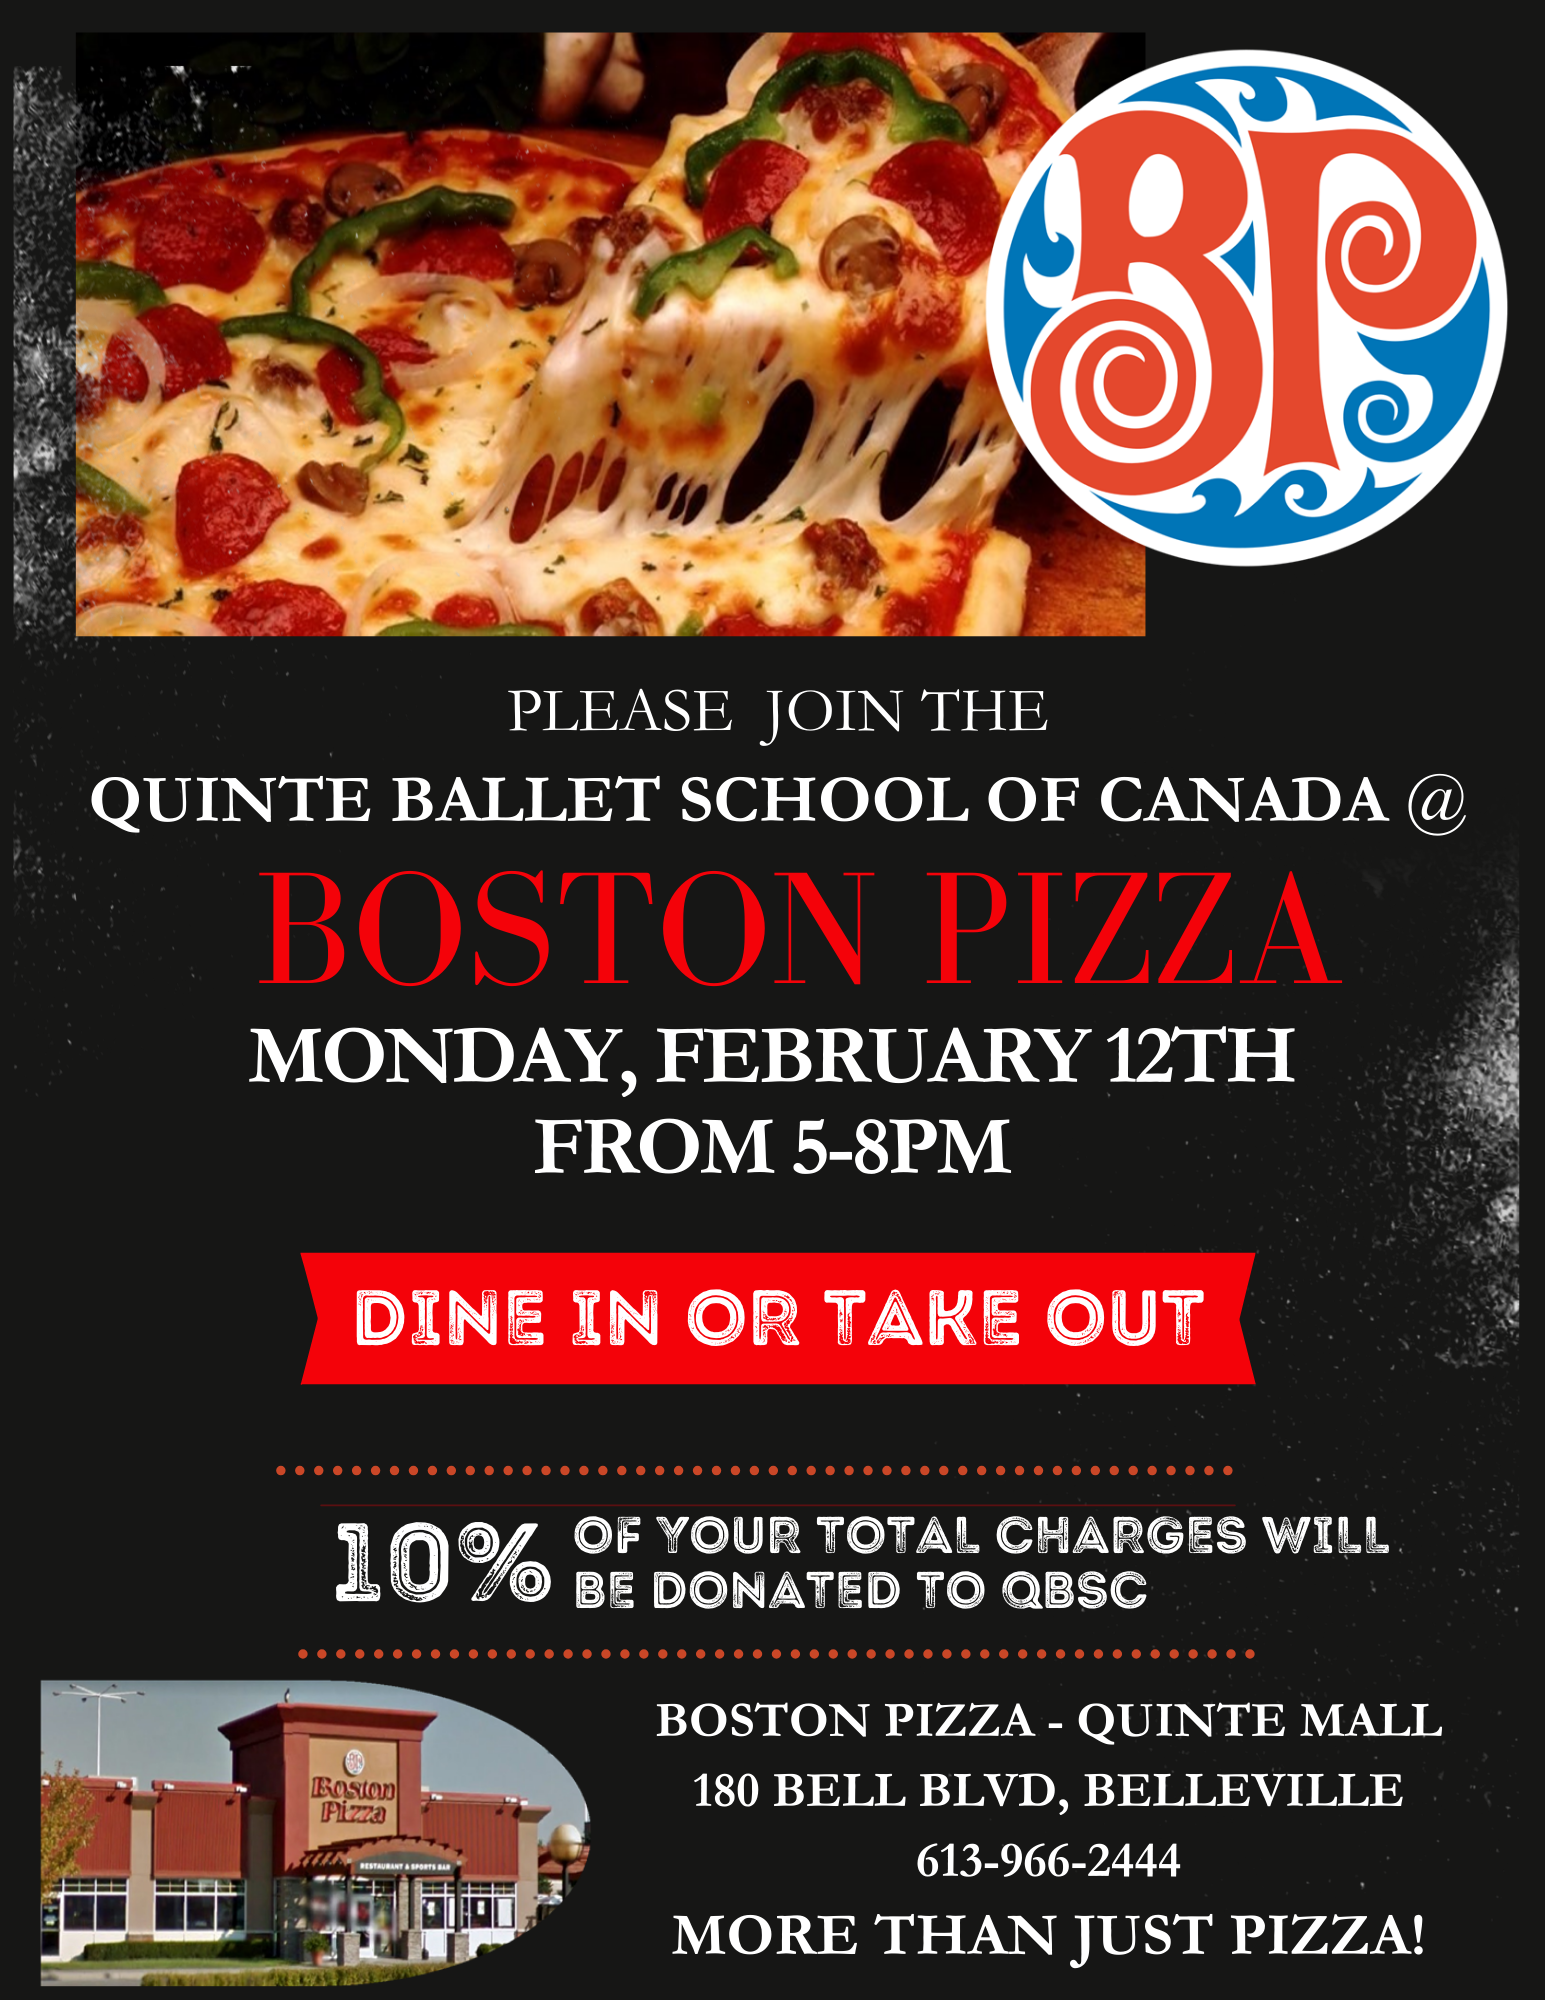 event poster with image of pizza, Boston Pizza's logo and event details.